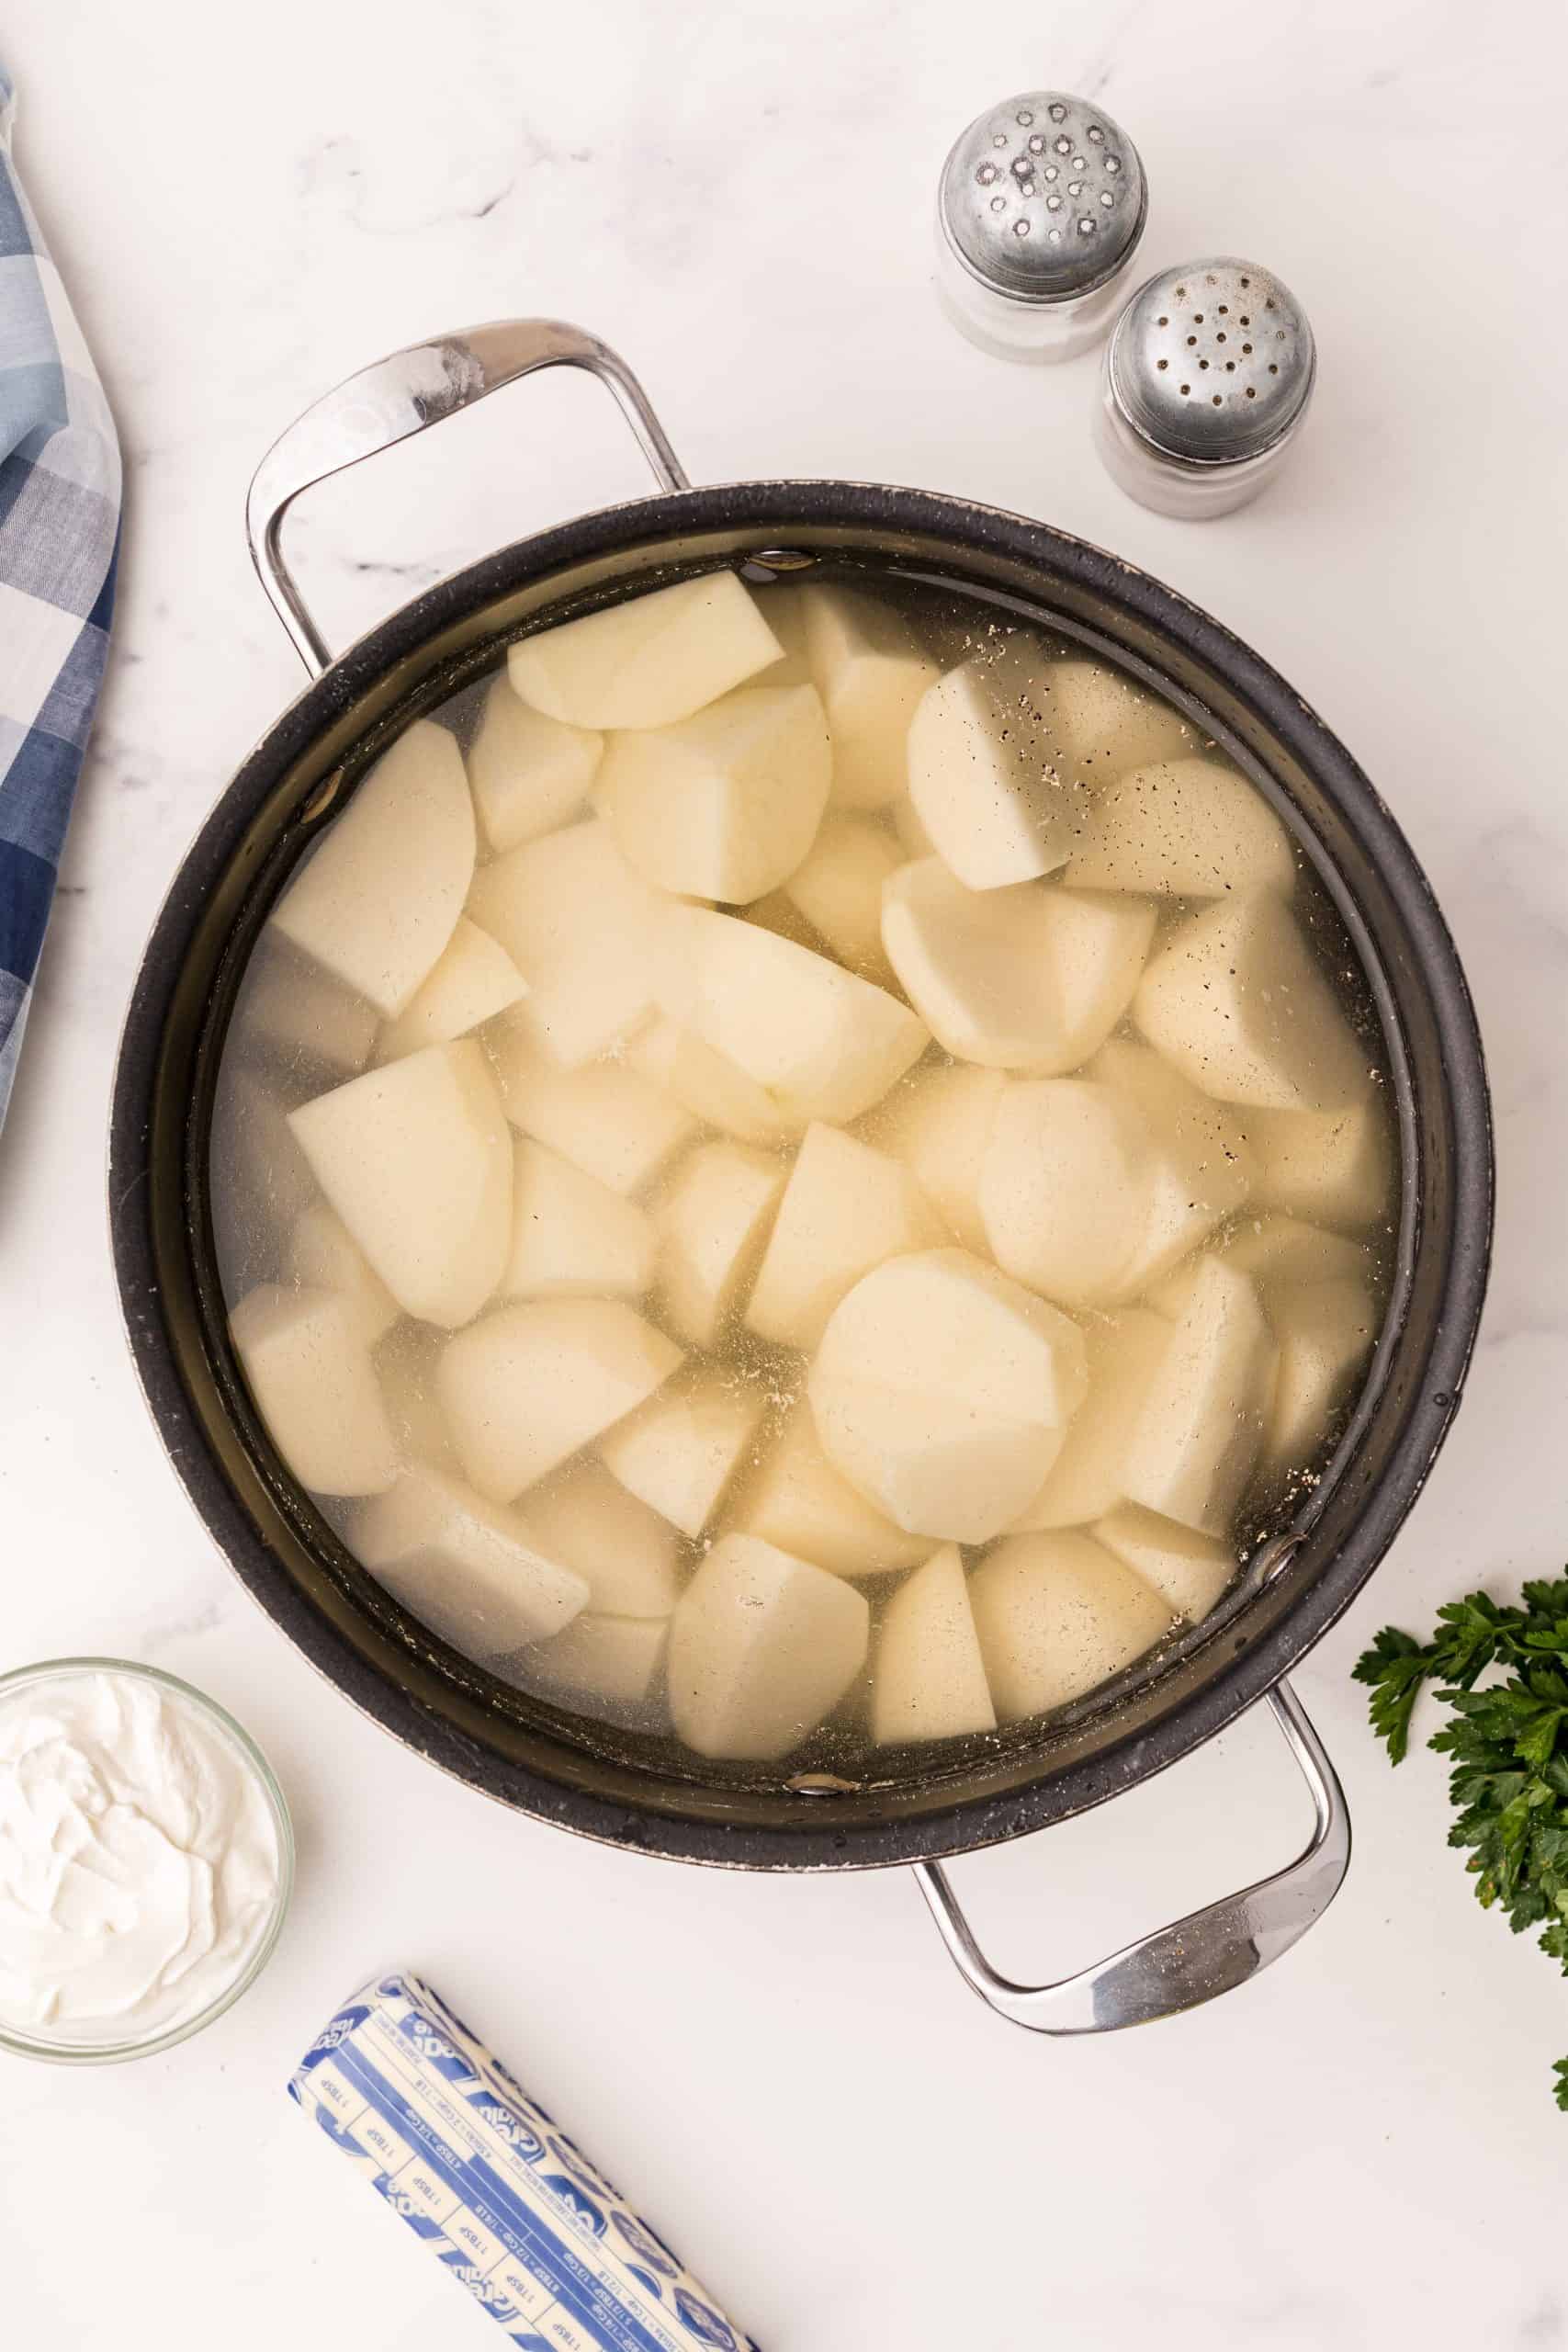 Potatoes boiling in water in a large pot.